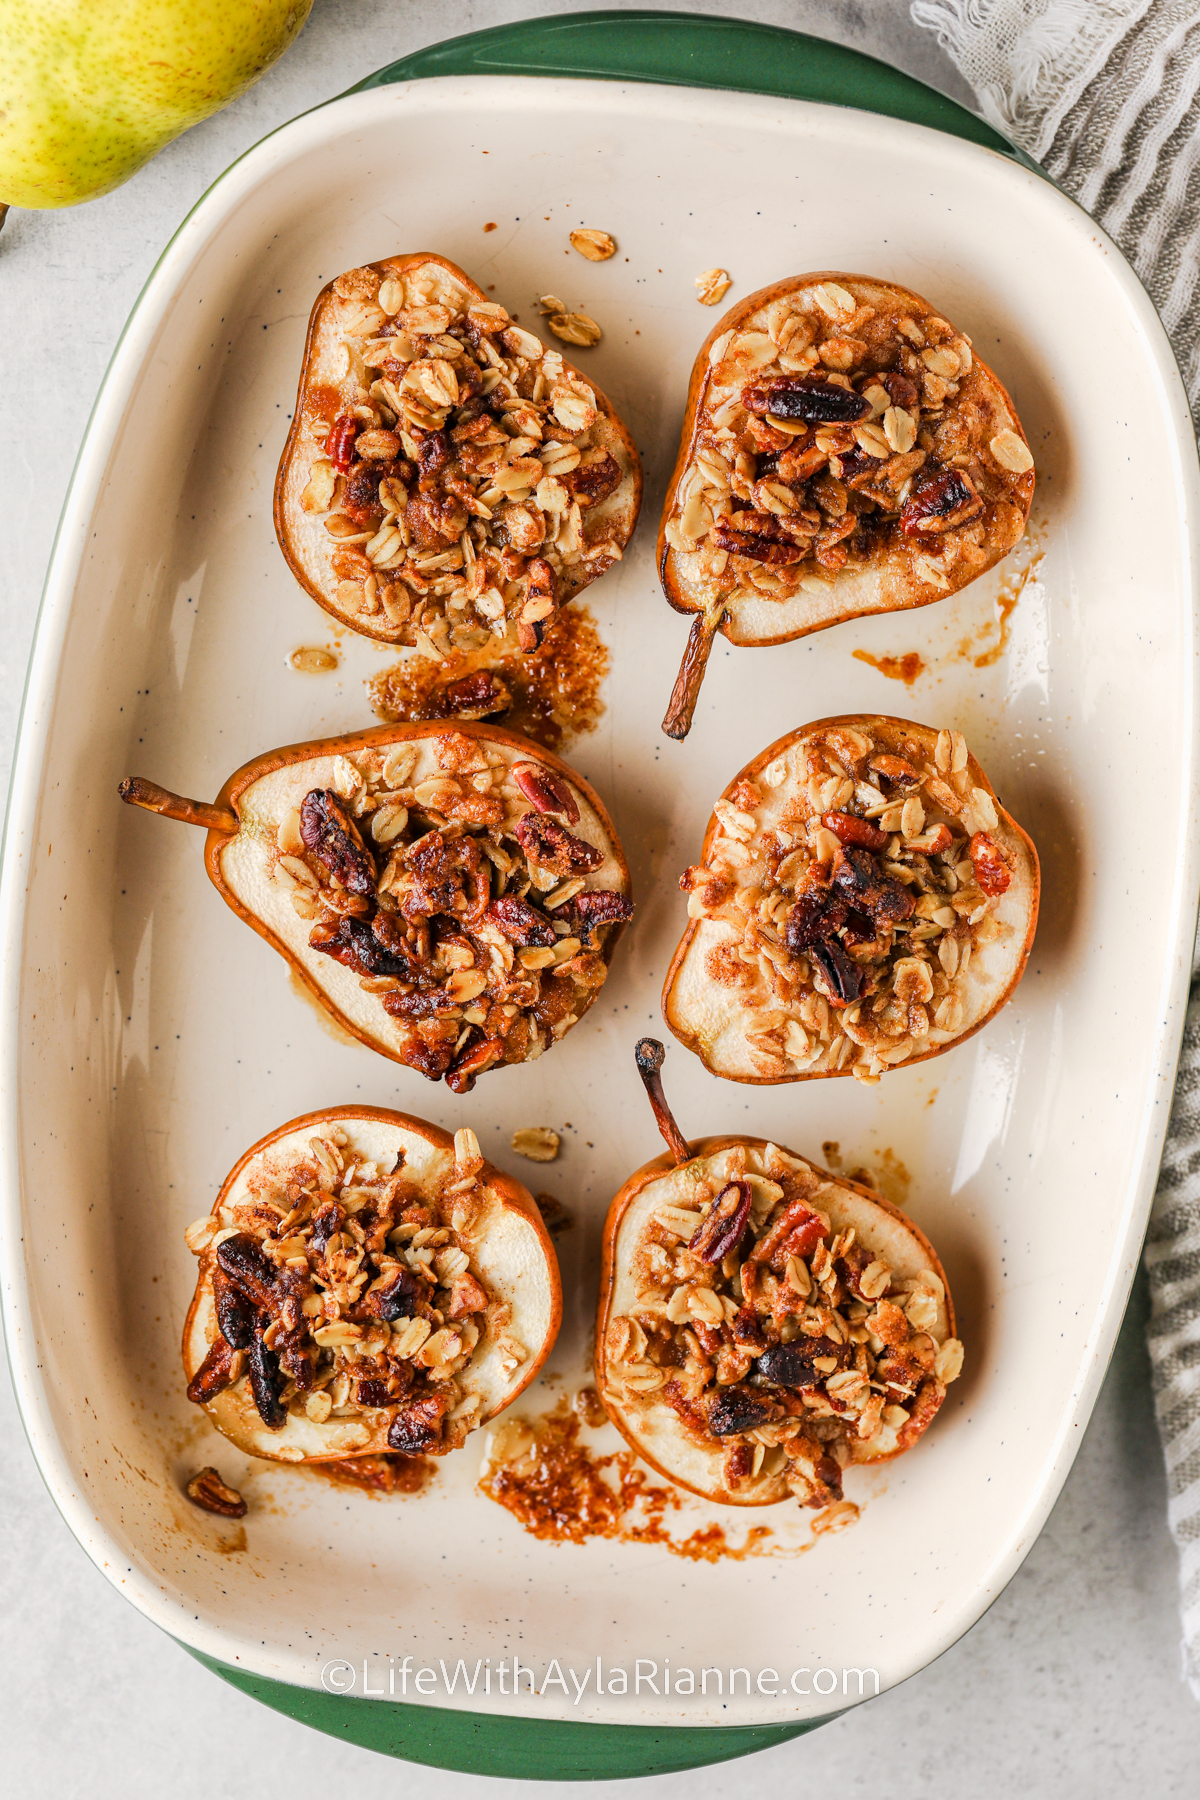 Baked pears in a baking dish